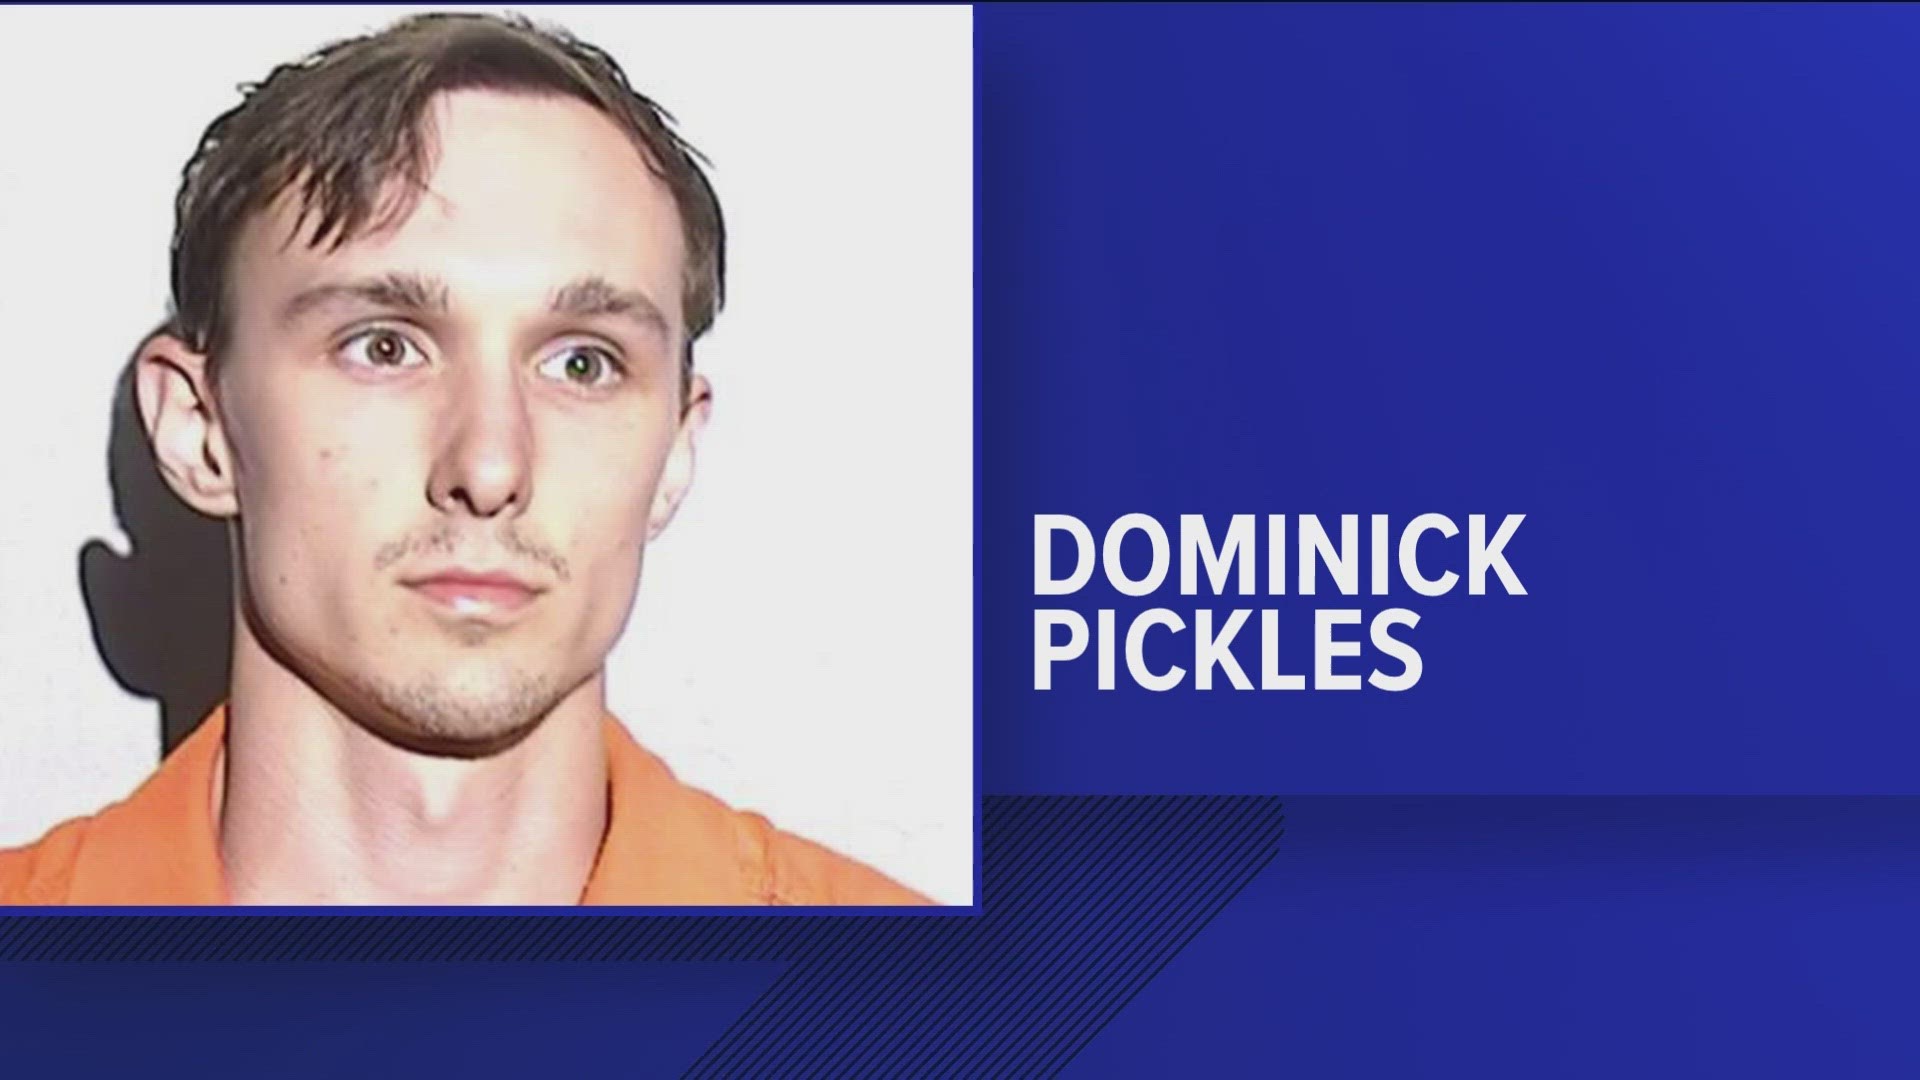 Police say Dominick Pickles, 24, was arrested in Maumee after he allegedly exchanged sexually explicit photos with multiple minors.